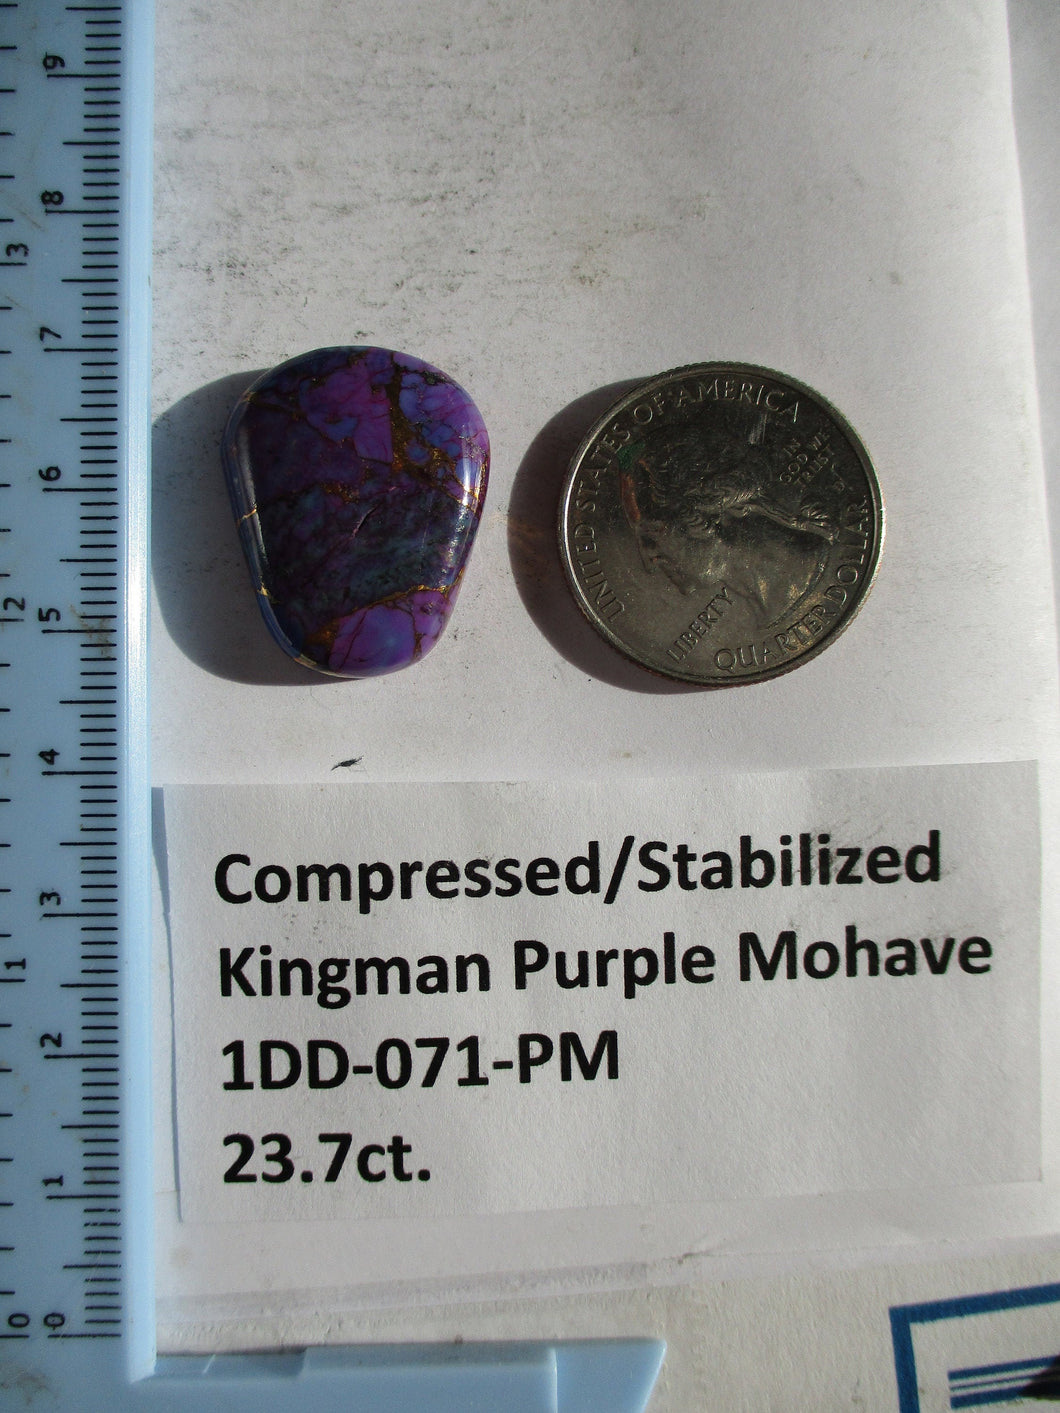 23.7 ct. (24.5x20x6 mm) Pressed/Dyed/Stabilized Kingman Purple Mohave Turquoise Gemstone 1DD 071